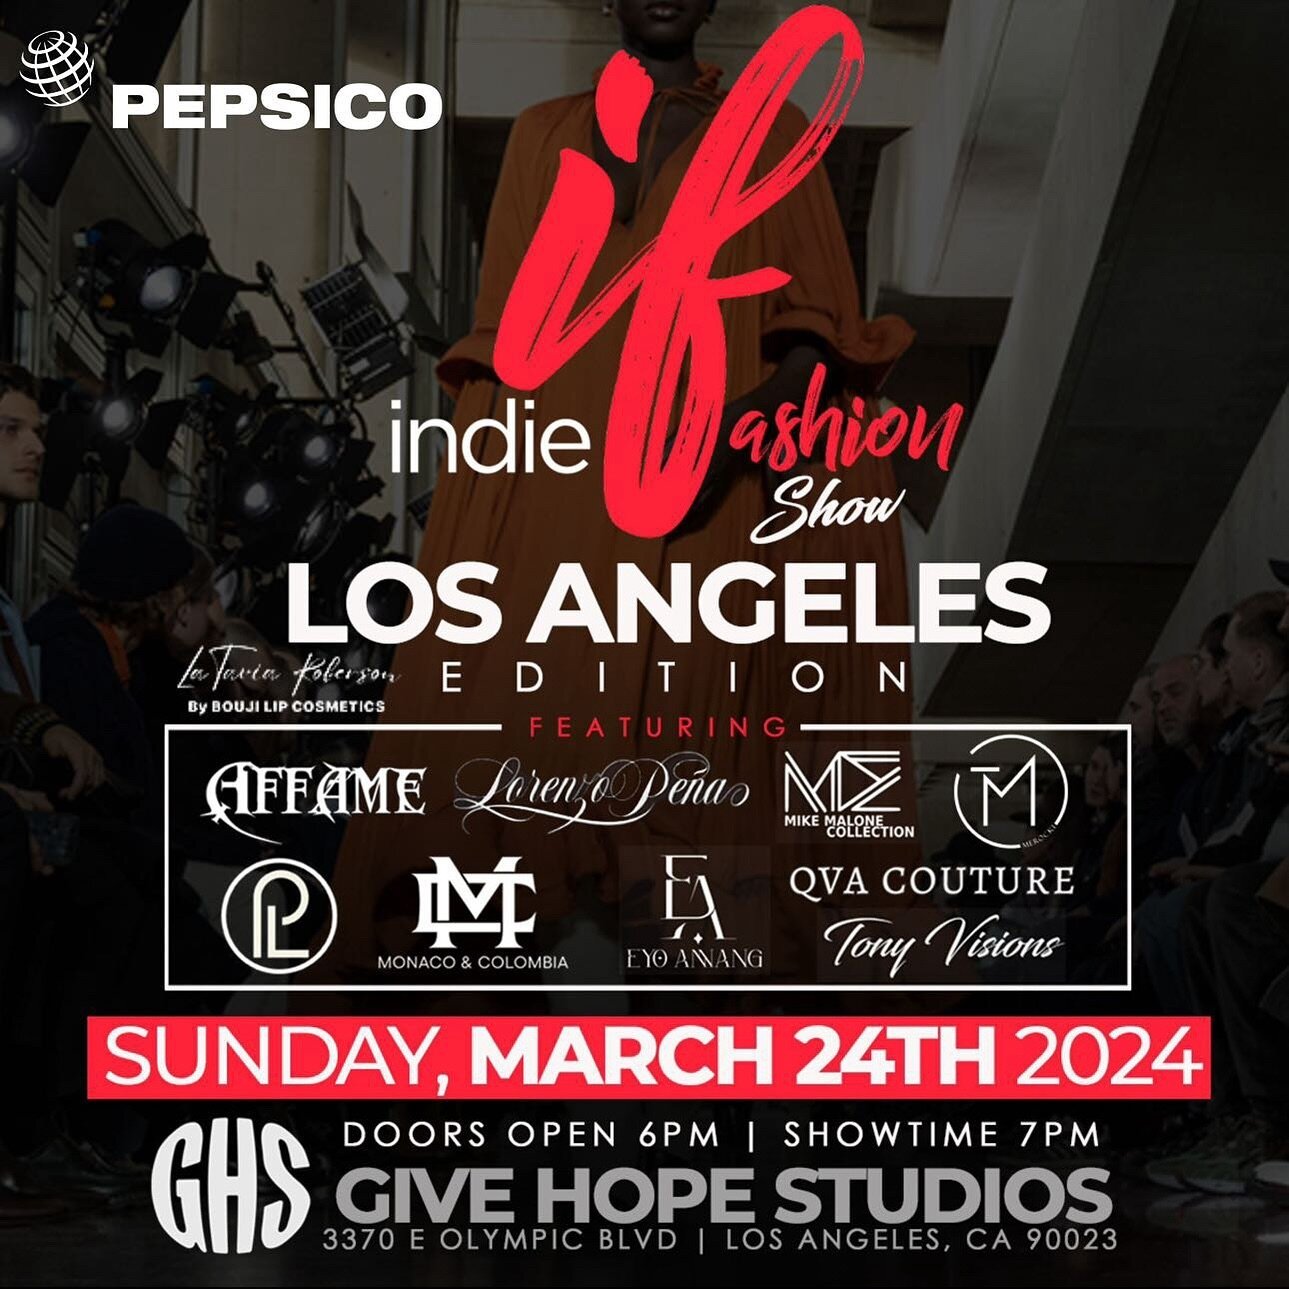 Tickets available at www.INDIEFASH.com

Indie Fashion Show Los Angeles Edition
Sunday, March 24th 2024

Give Hope Studios
3370 E Olympic Blvd | Los Angeles, CA 90023
Doors open 6pm | Showtime 7pm

Featuring:
Phillip Loving 
Affame
Mike Malone
QVA Cou